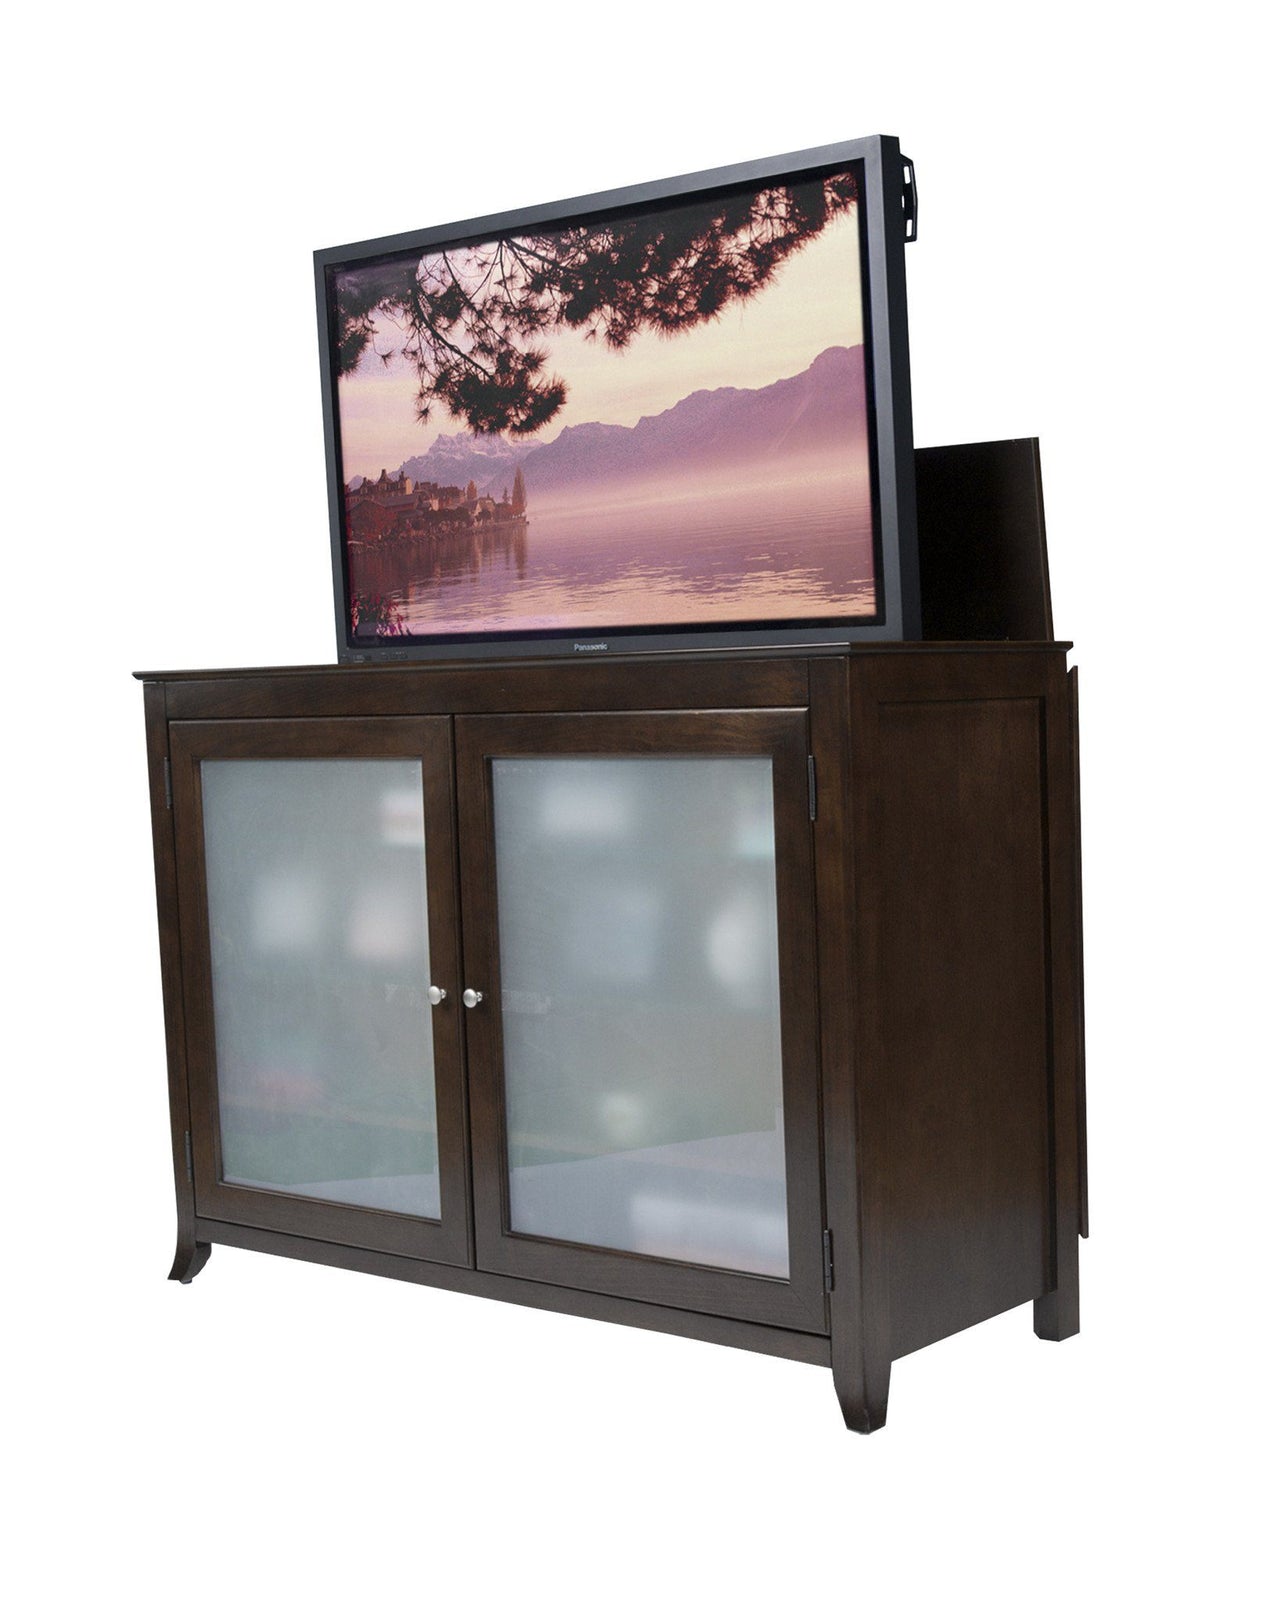 Touchstone Tuscany Full Size Tv Lift Cabinets For Up To 60” Flat Screen Tv’S Tv Lift Cabinets Touchstone 